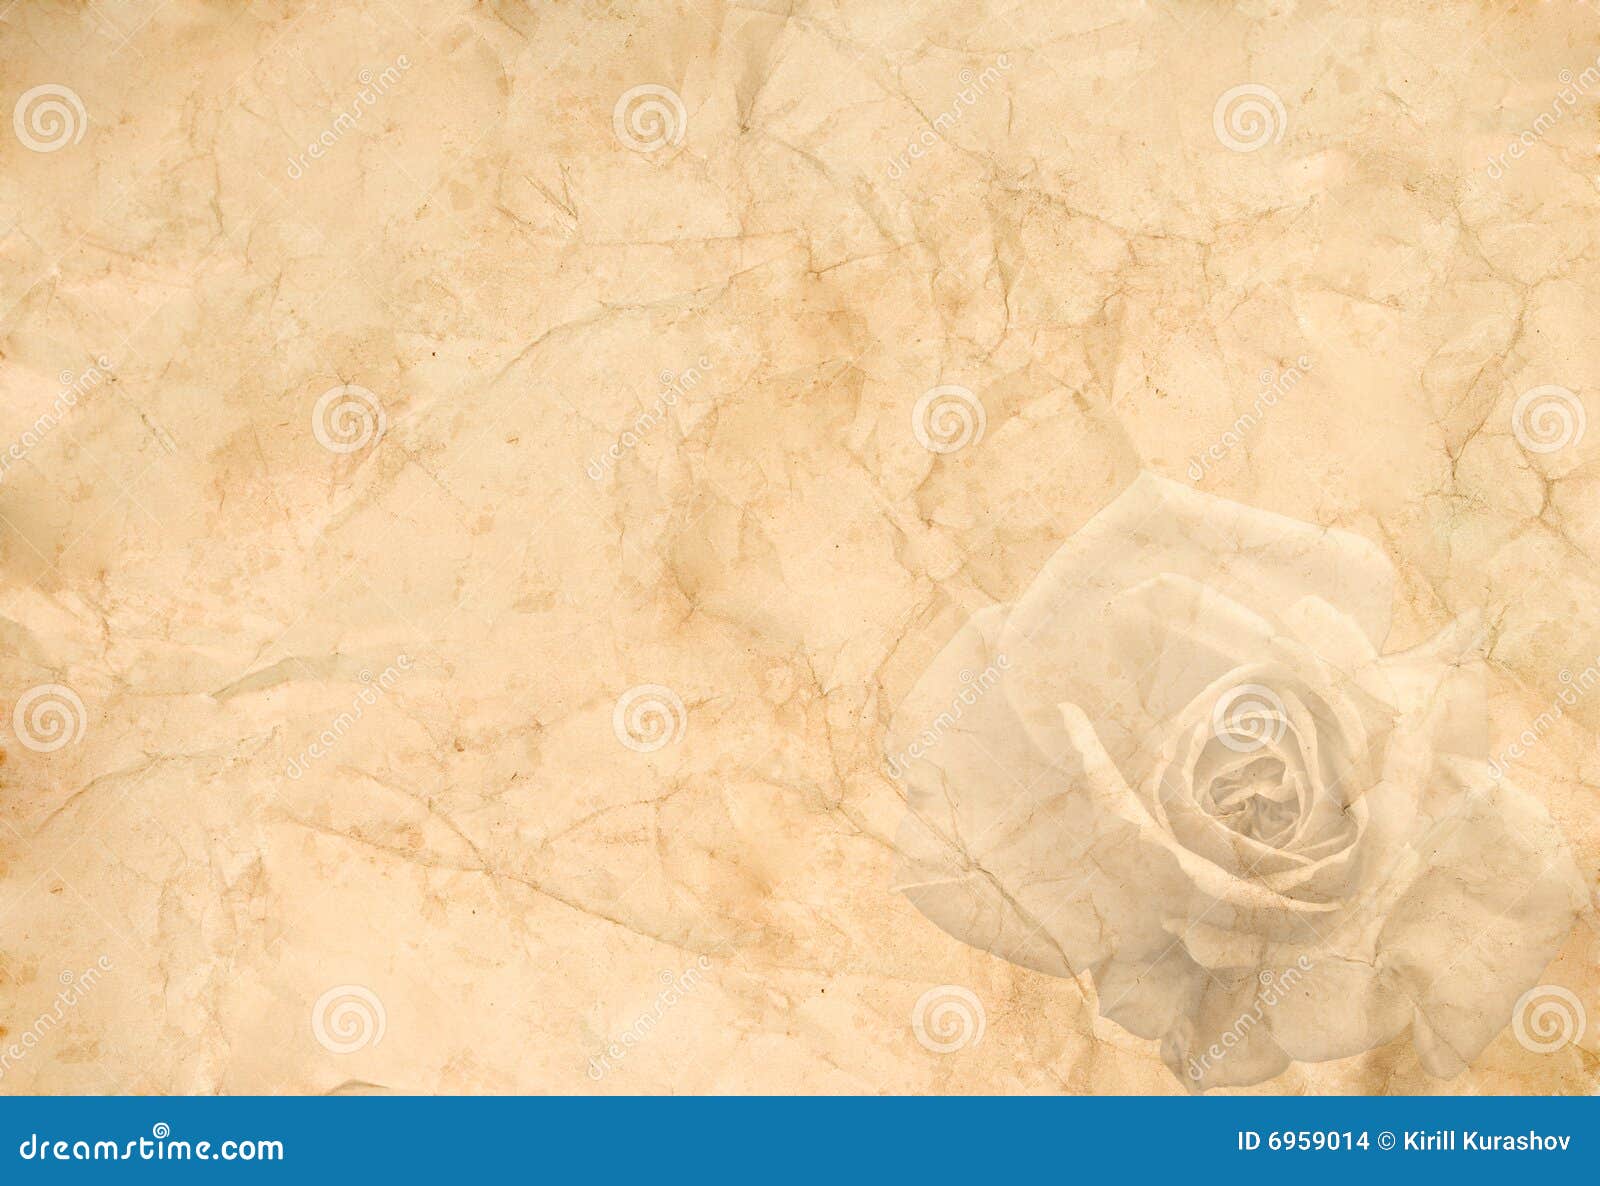 Old Crumpled Paper Rose Stock Illustrations – 359 Old Crumpled Paper Rose  Stock Illustrations, Vectors & Clipart - Dreamstime